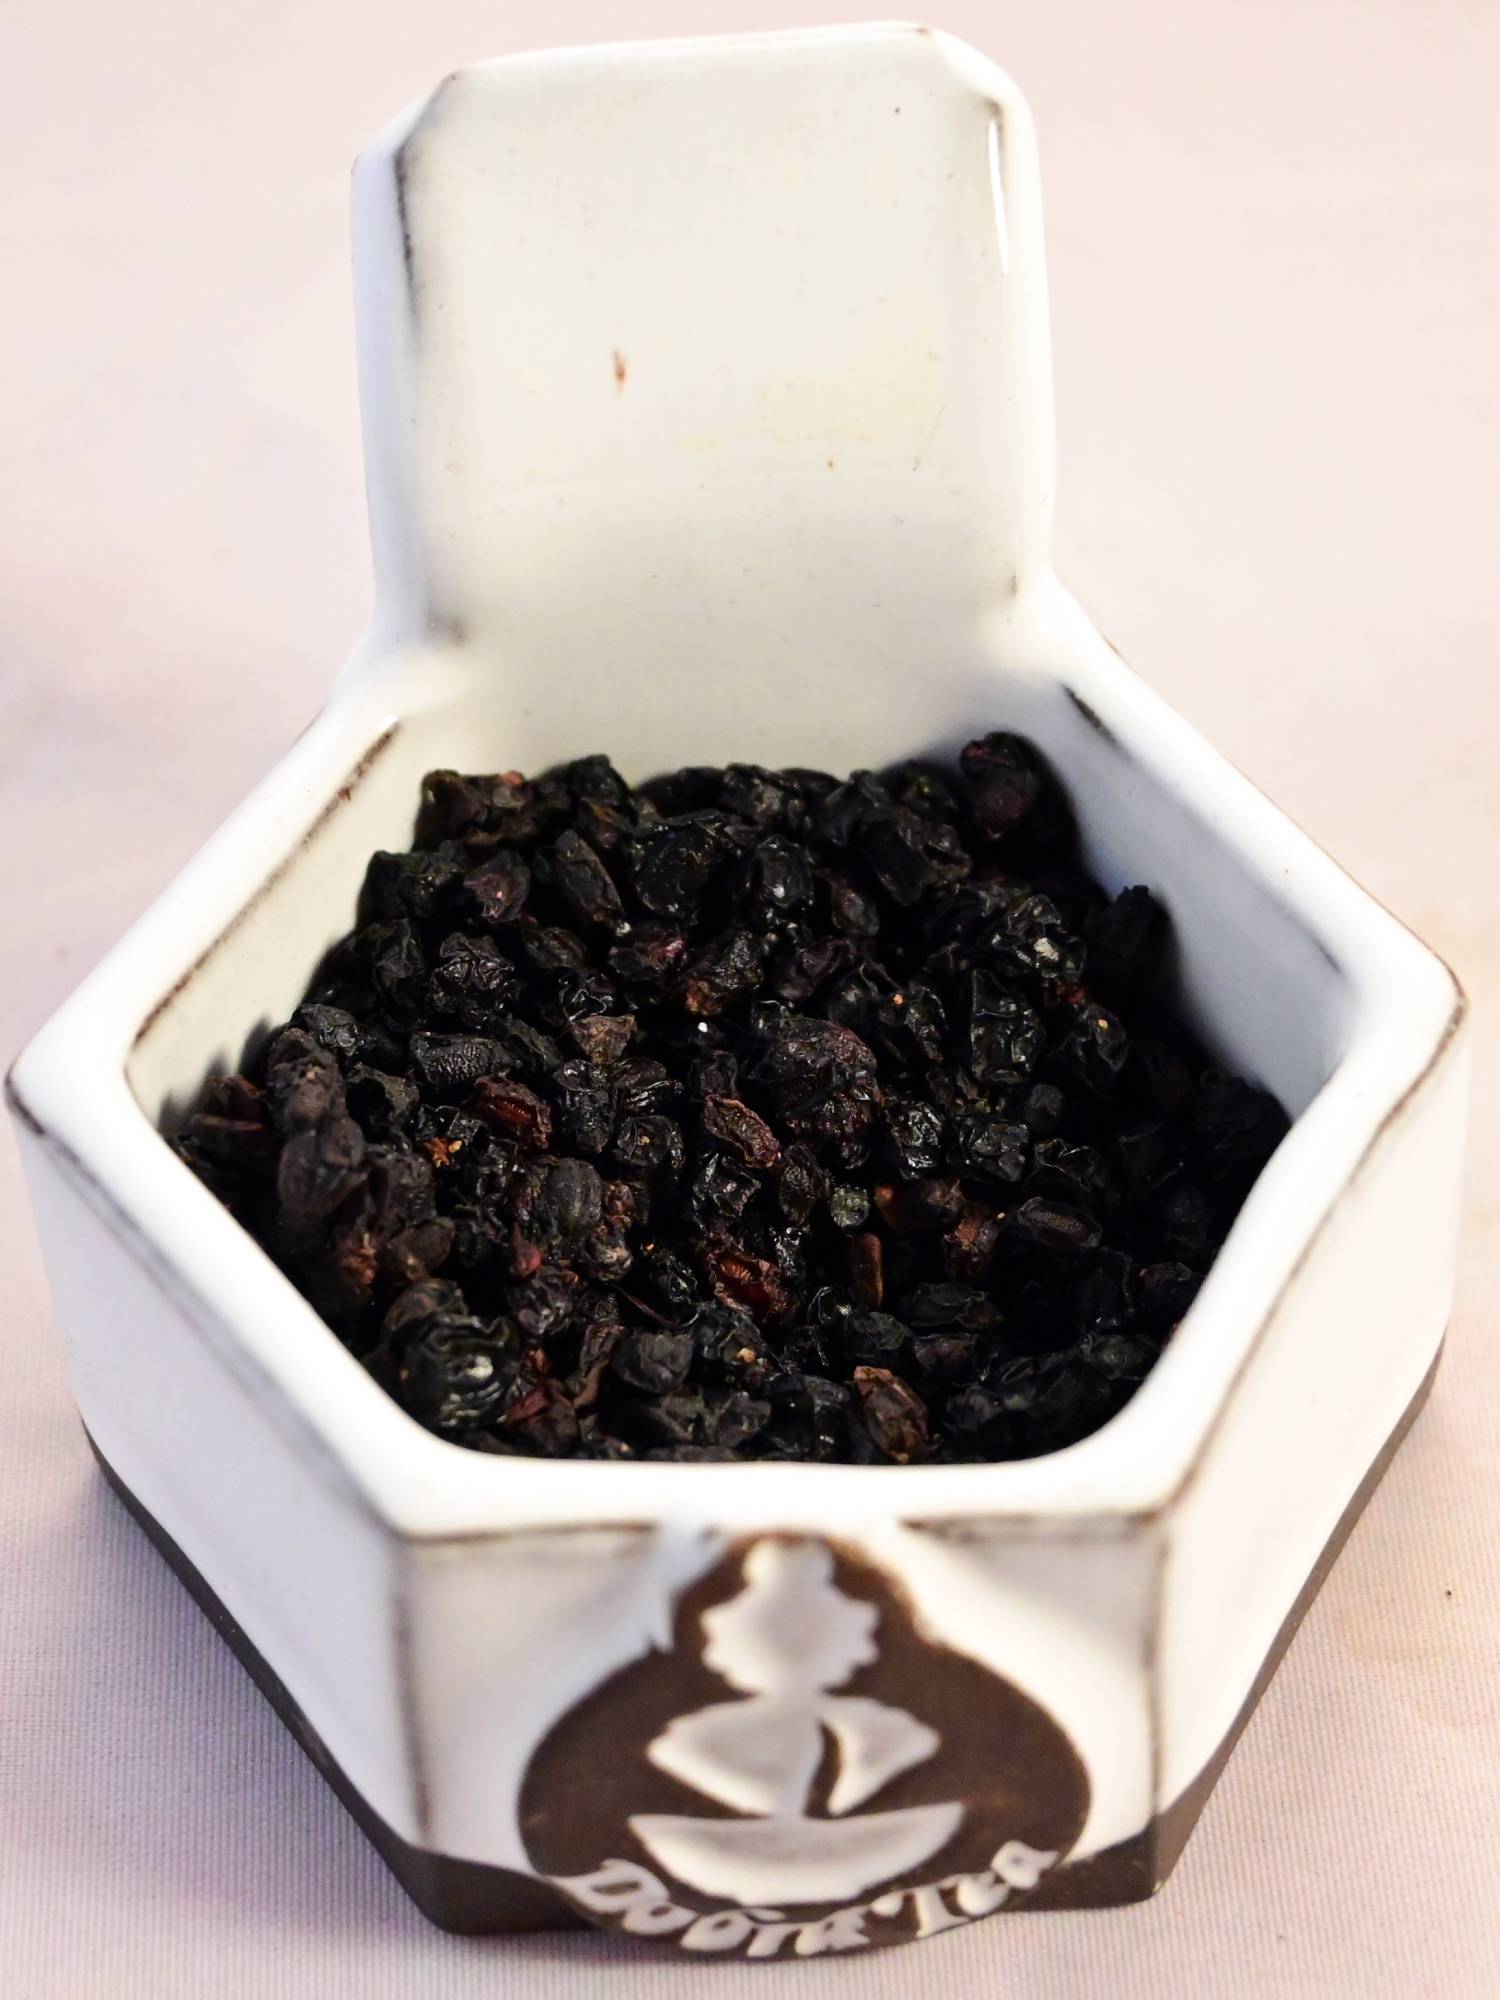 A close-up of dried elder berries. They are black with red undertones, and resemble raisins.